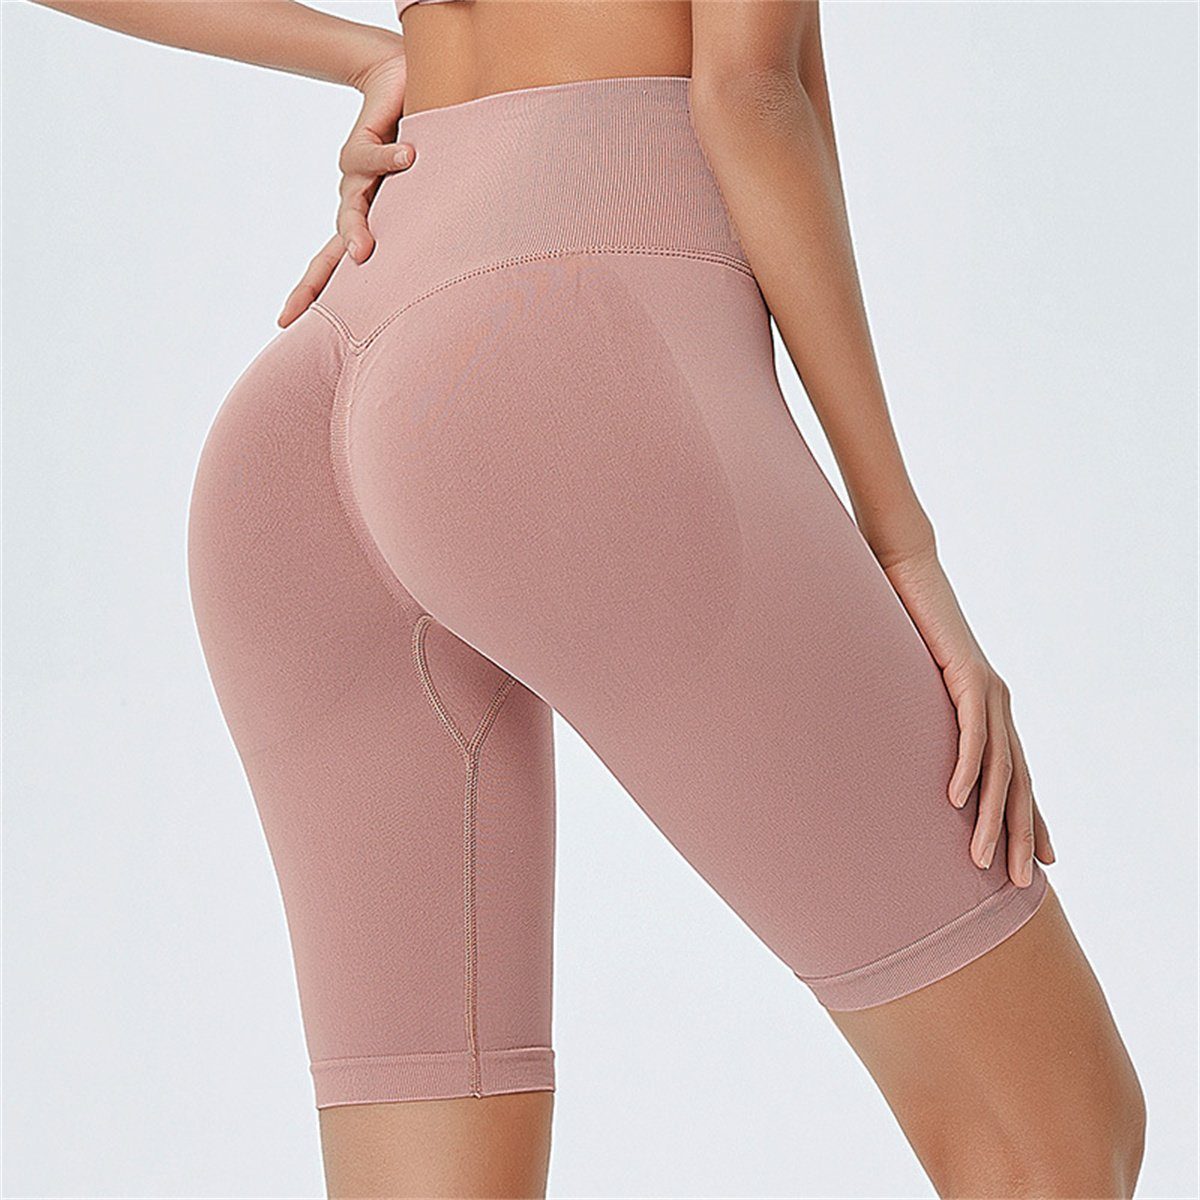 Yogatights selected Taille hellrosa Damen-Fitness-Po-Lifting-Yoga-Shorts hoher mit carefully